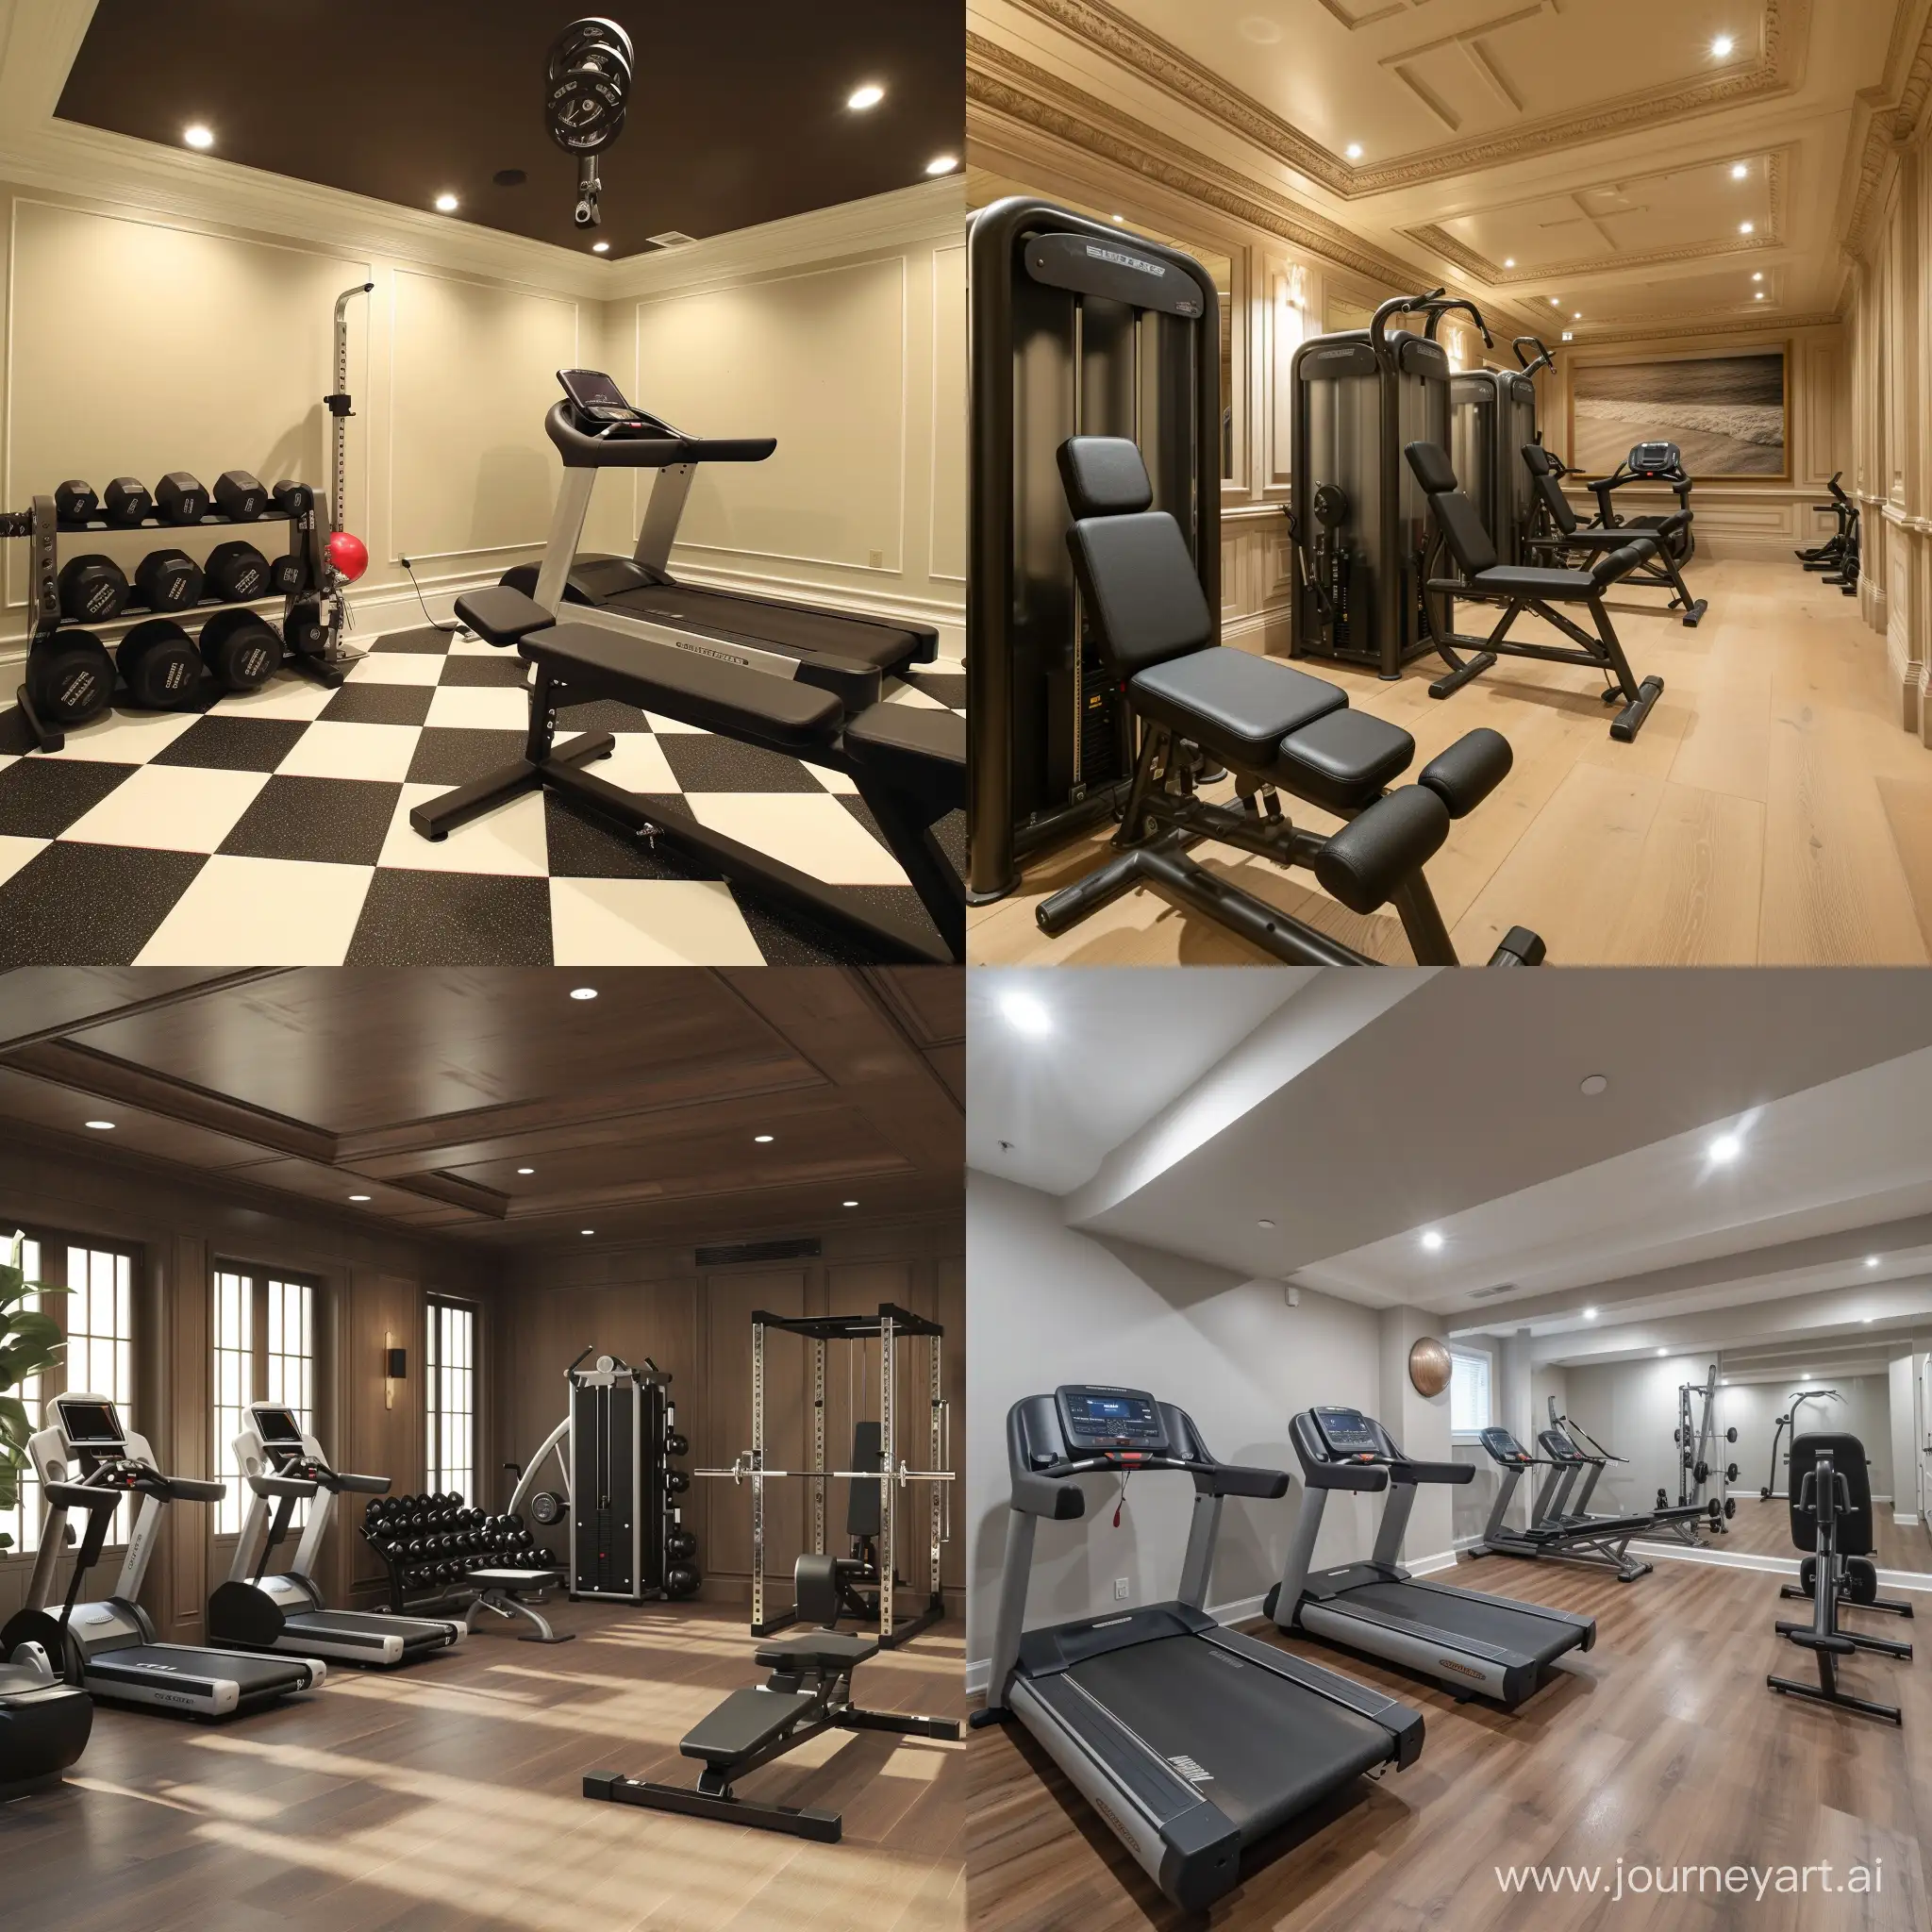 Spacious-Gym-Room-with-Modern-Design-Version-6